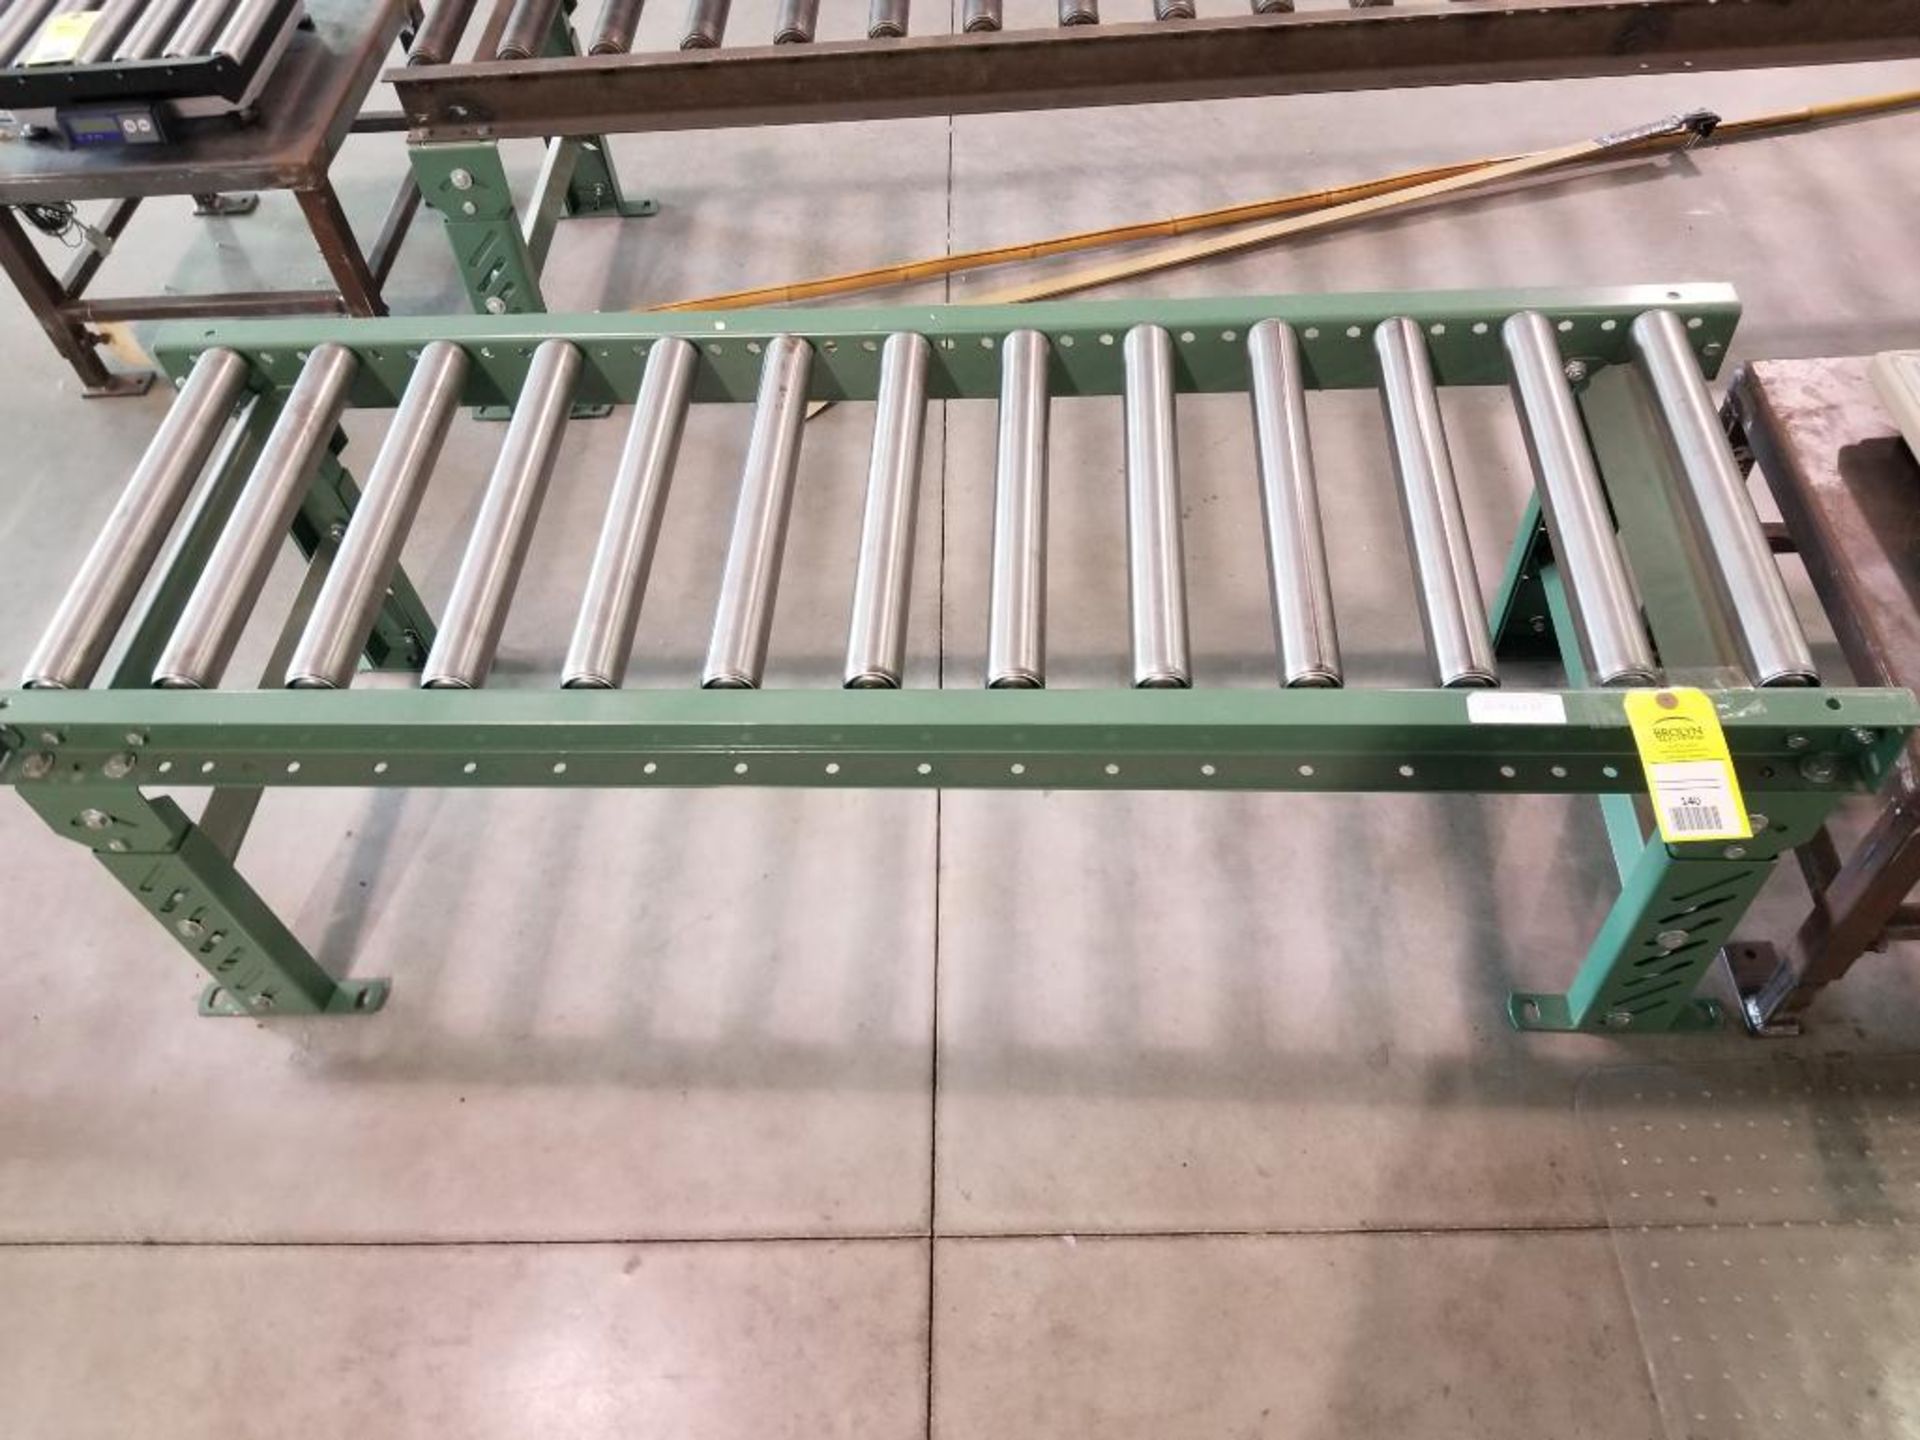 5ft roller conveyor section. 20in wide by 20in tall. (legs are adjustable to change height)